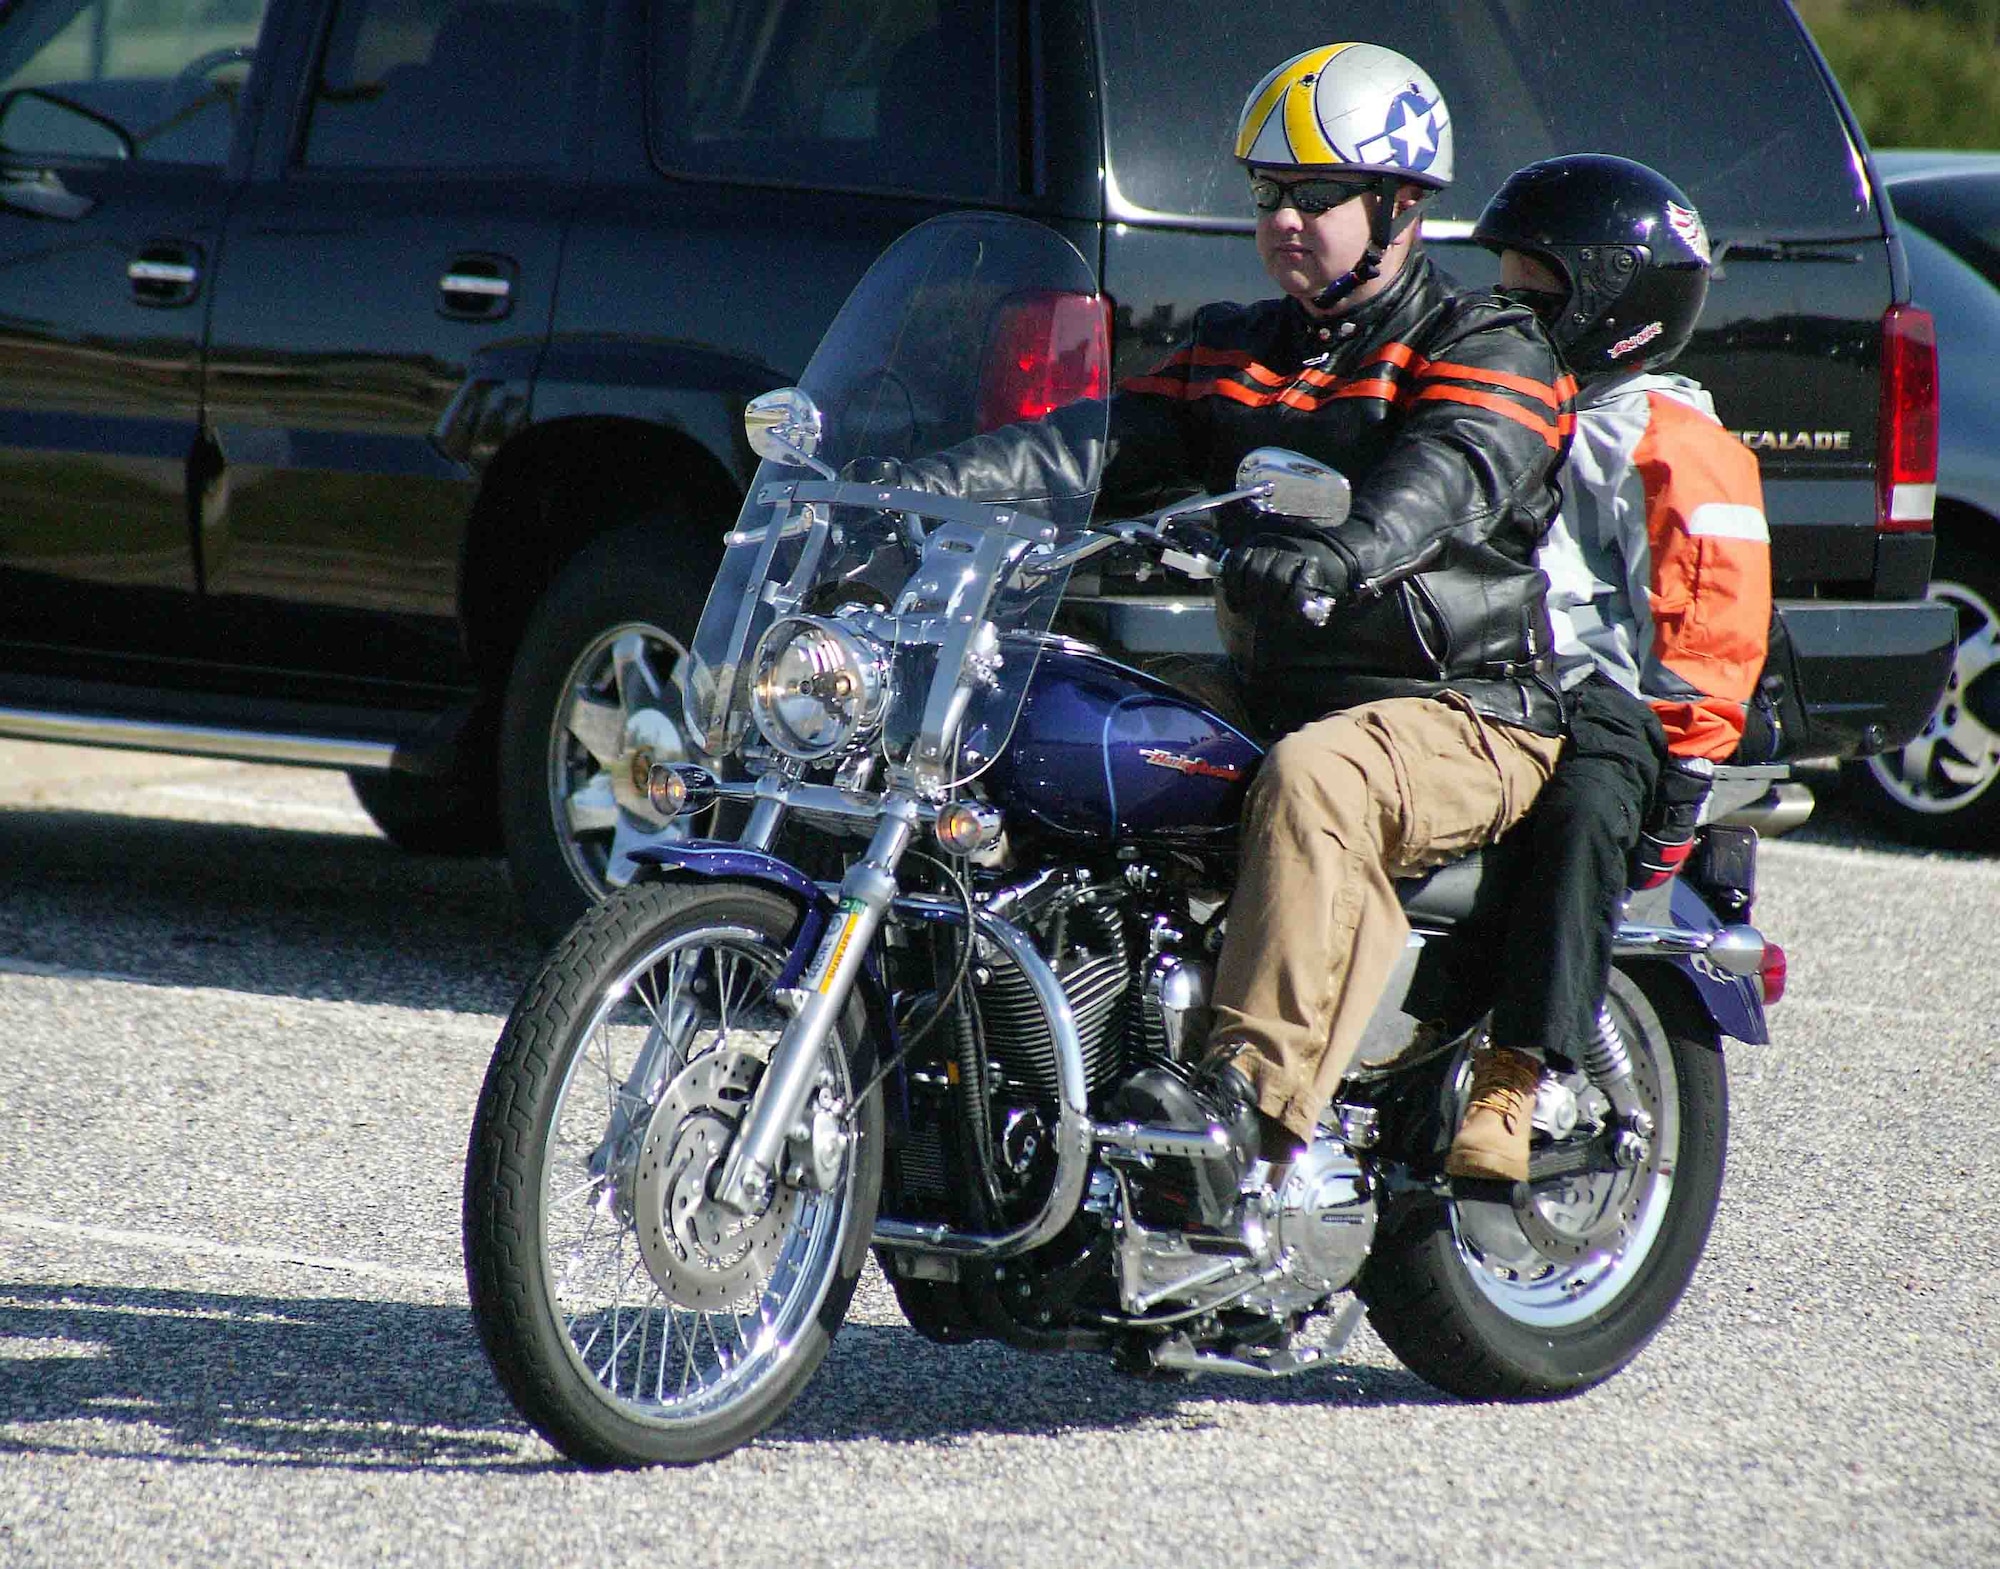 SHAW AIR FORCE BASE, S.C. -- Staff Sgt. Sean Anderson, 20th Medical Support Squadron, and his son arrive at the Shaw Motorcycle Riders Association bike show March 17. The SMRA hosted the bike show to promote motorcycle safety and awareness. Sergeant Anderson won the "Best Cruiser" title. (U.S. Air Force photo/Senior Airman John Gordinier) 